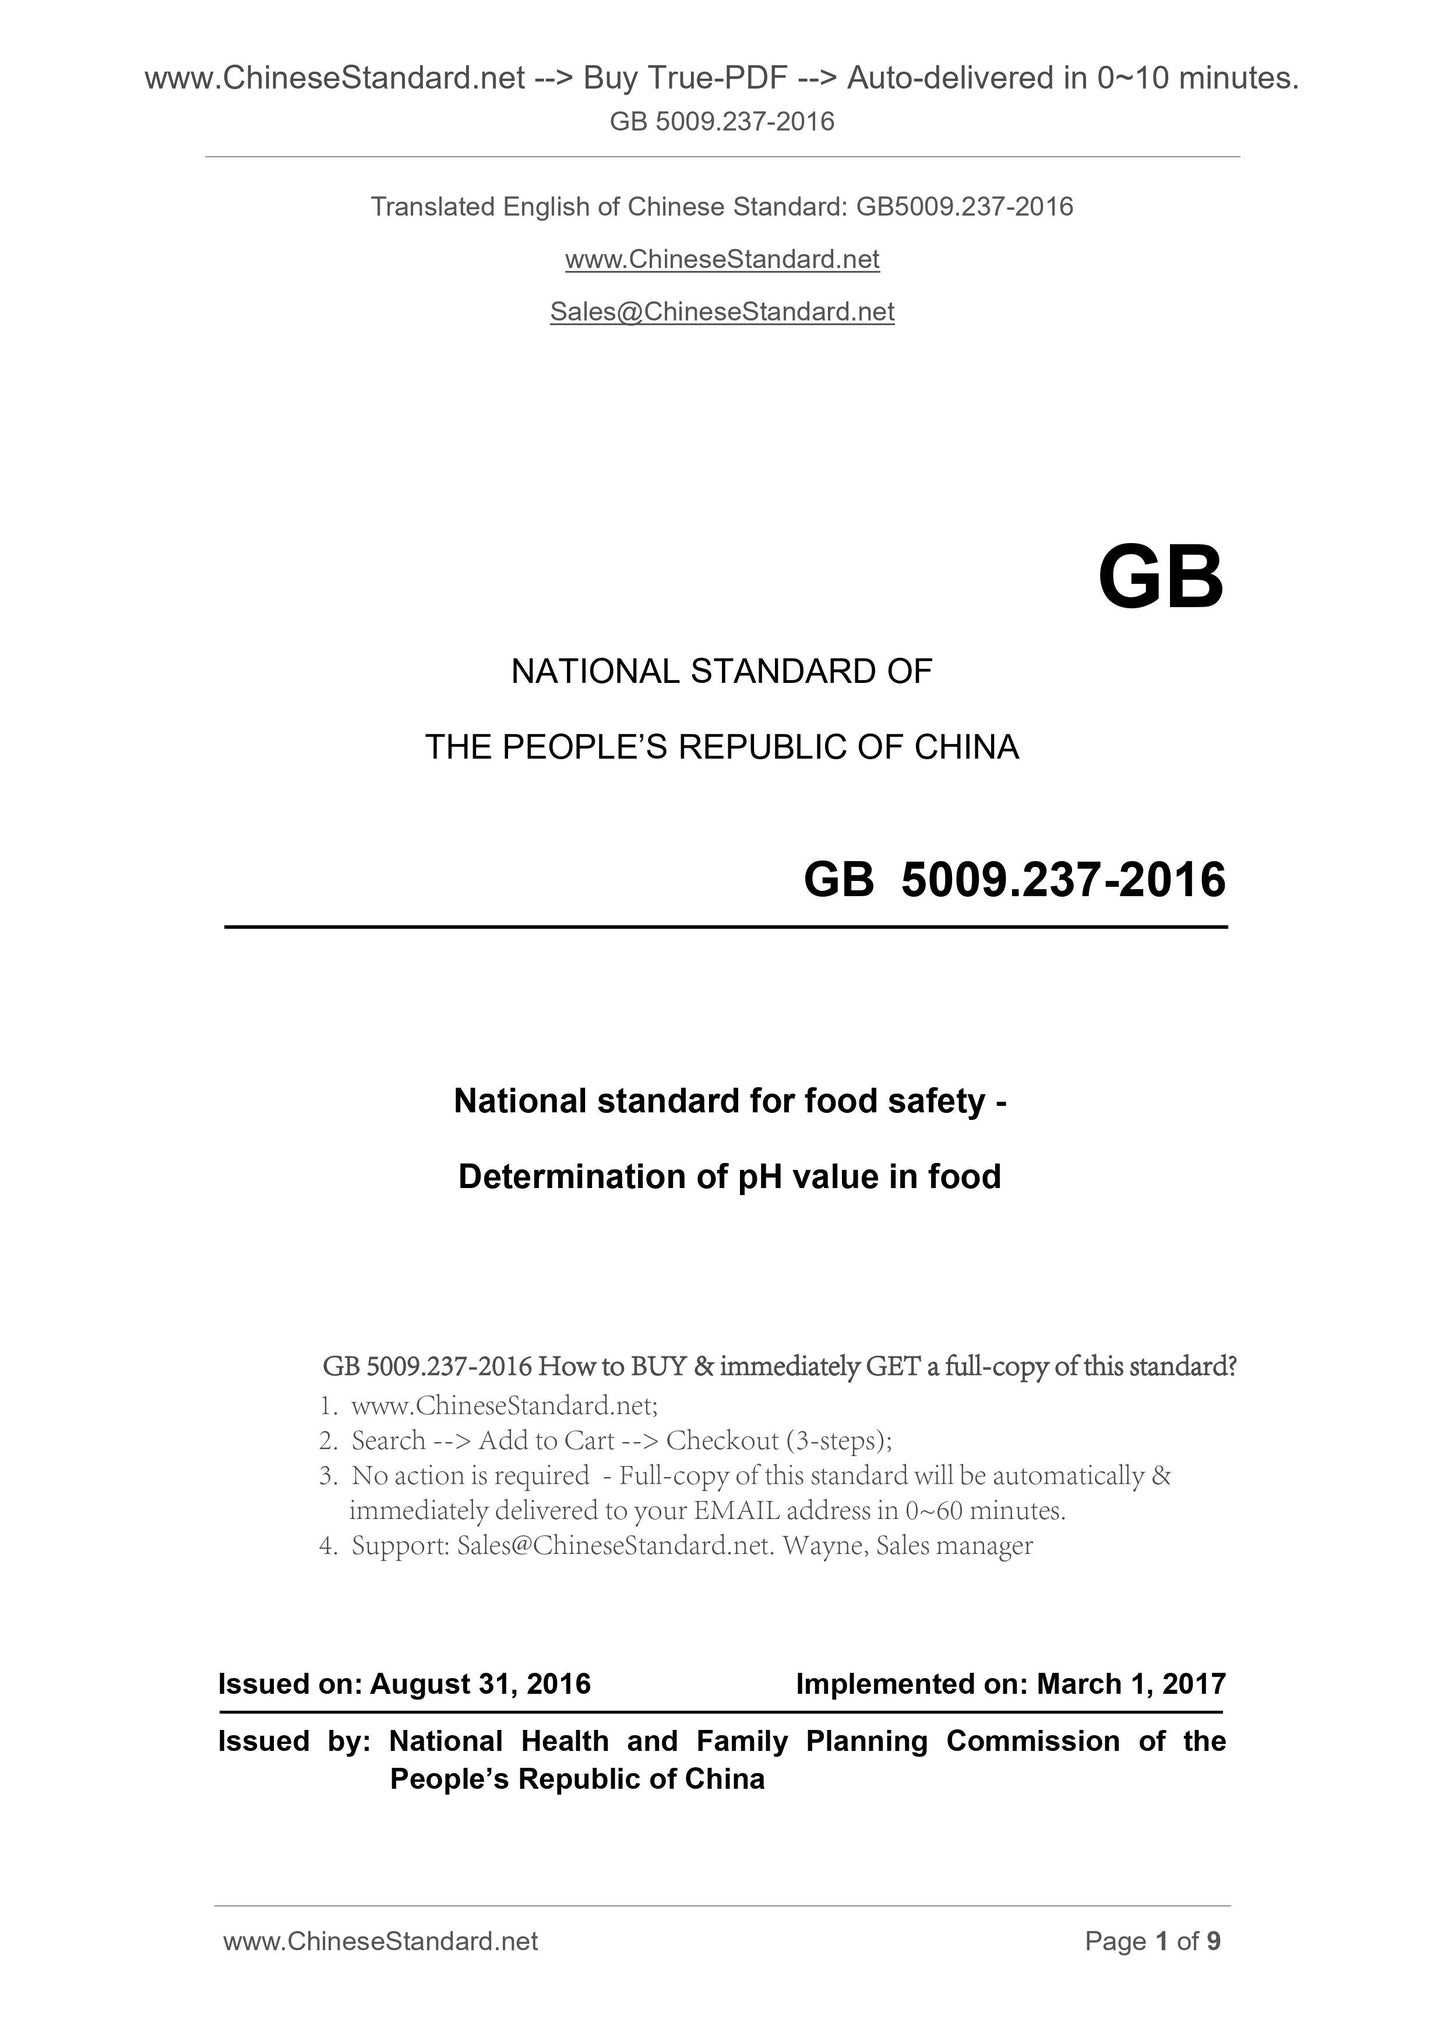 GB 5009.237-2016 Page 1